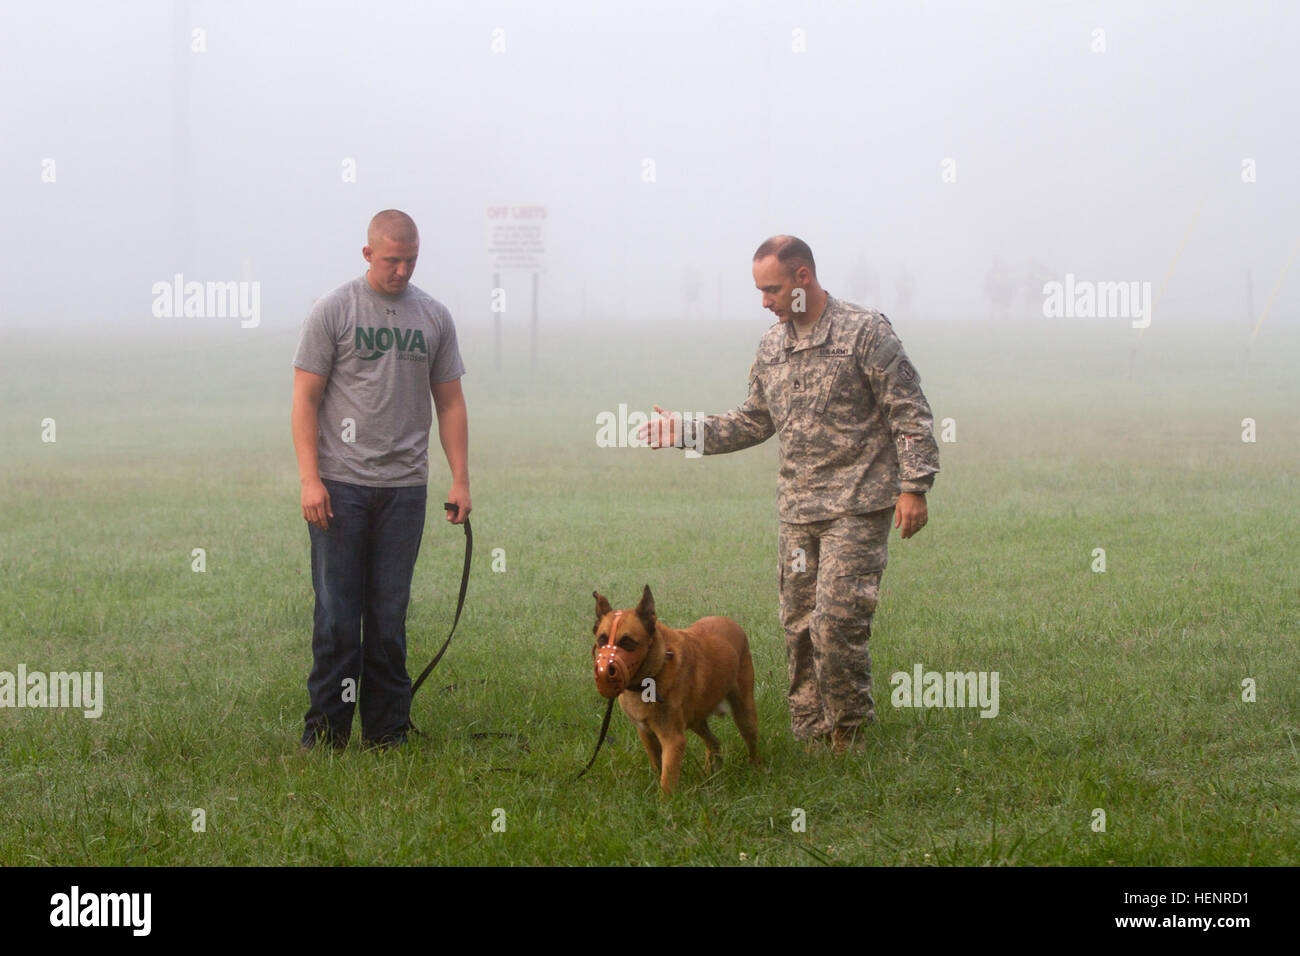 Staff Sgt. Jonathan Rose, the kennel master for the 510th Military Police Detachment, 716th Military Police Battalion, supported by the 101st Sustainment Brigade, 101st Airborne Division, gives instruction to Pfc. Jared Bridges, a dog handler also with the 510th MP Det., during a retirement assessment for Arno, a military working dog, Sept. 4 at Fort Campbell, Ky. Arno has served for more than six years, and brings and brings a search asset to the military that cannot be replicated by man nor machine. (U.S. Army photo by Sgt. Leejay Lockhart, 101st Sustainment Brigade Public Affairs) Soldiers  Stock Photo